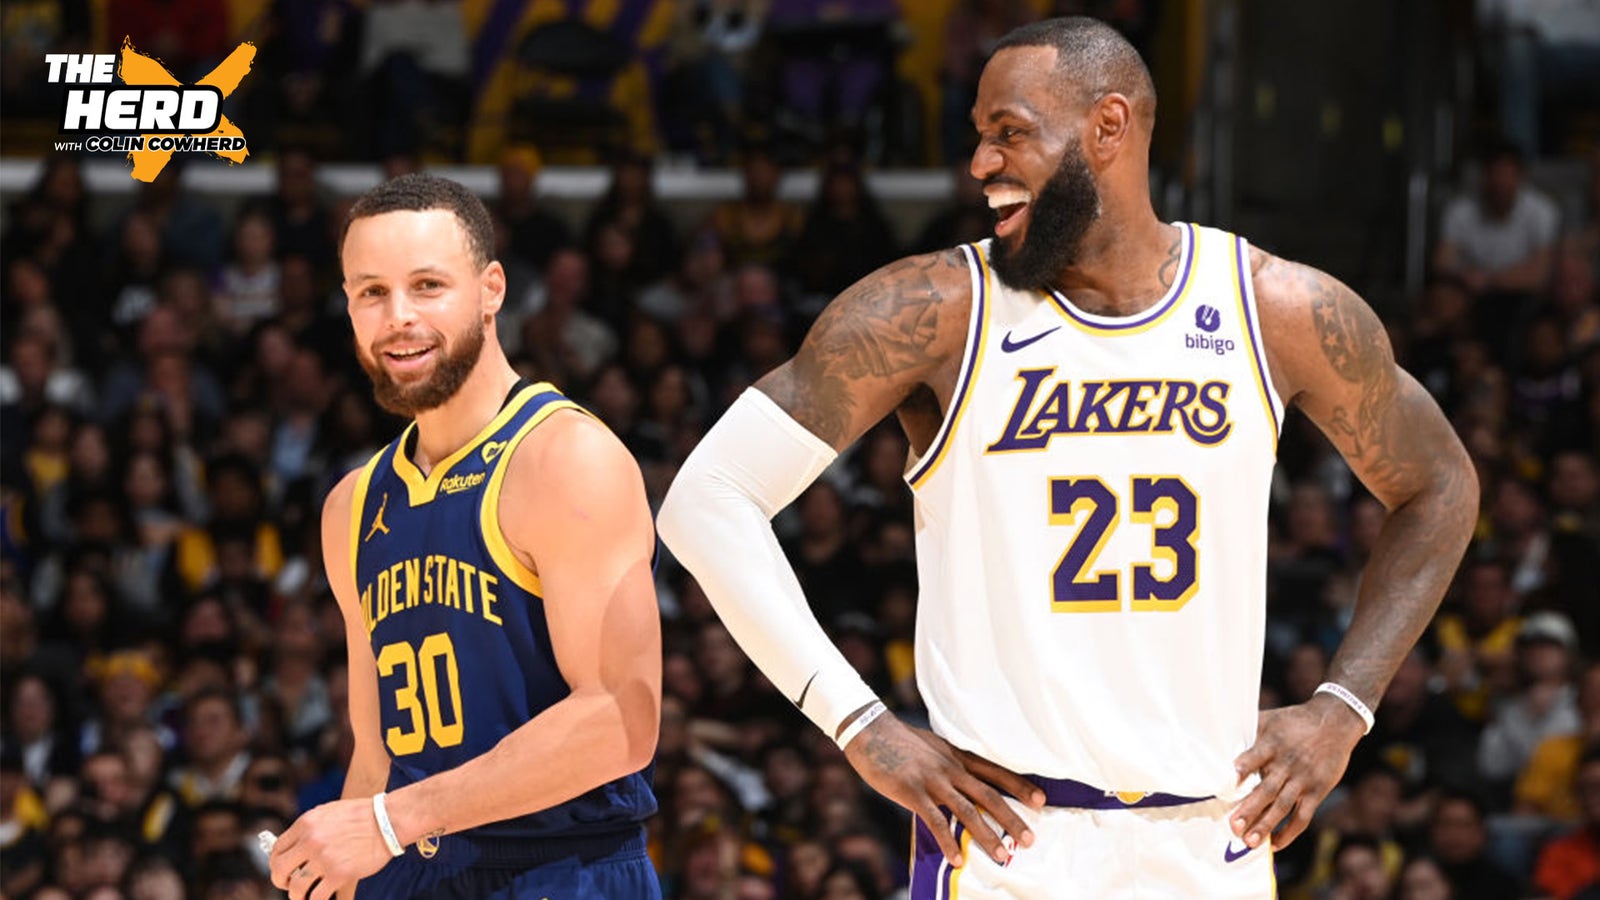 Is the LeBron James-Steph Curry NBA era over?